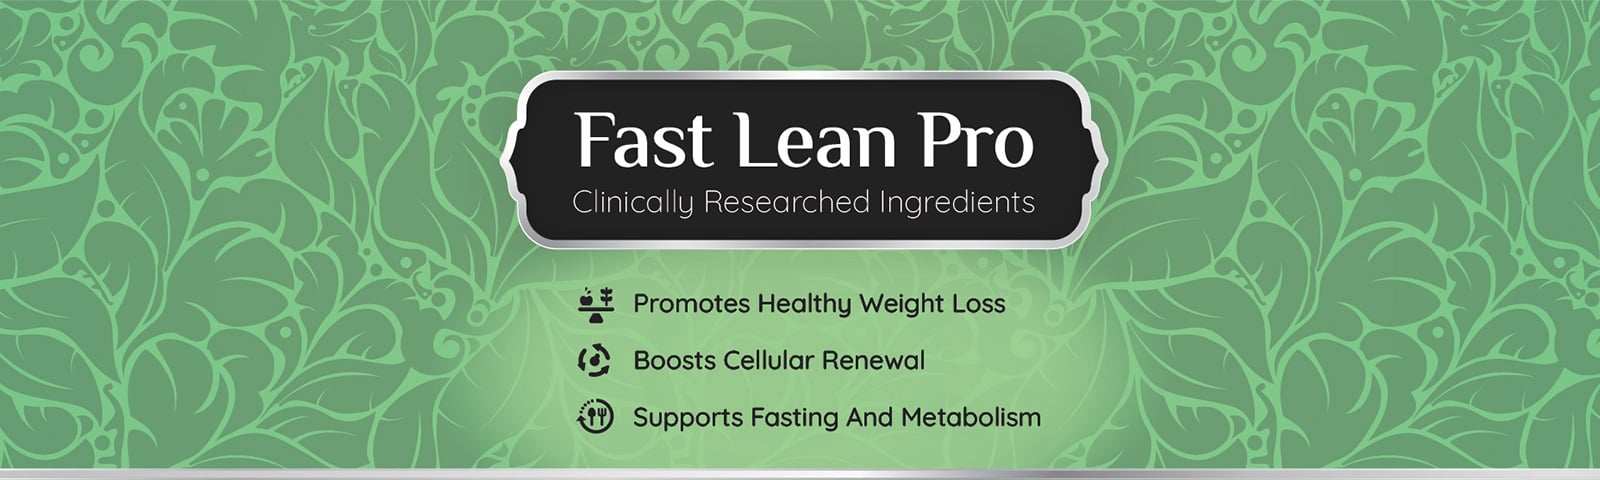 Fast Lean Pro researched